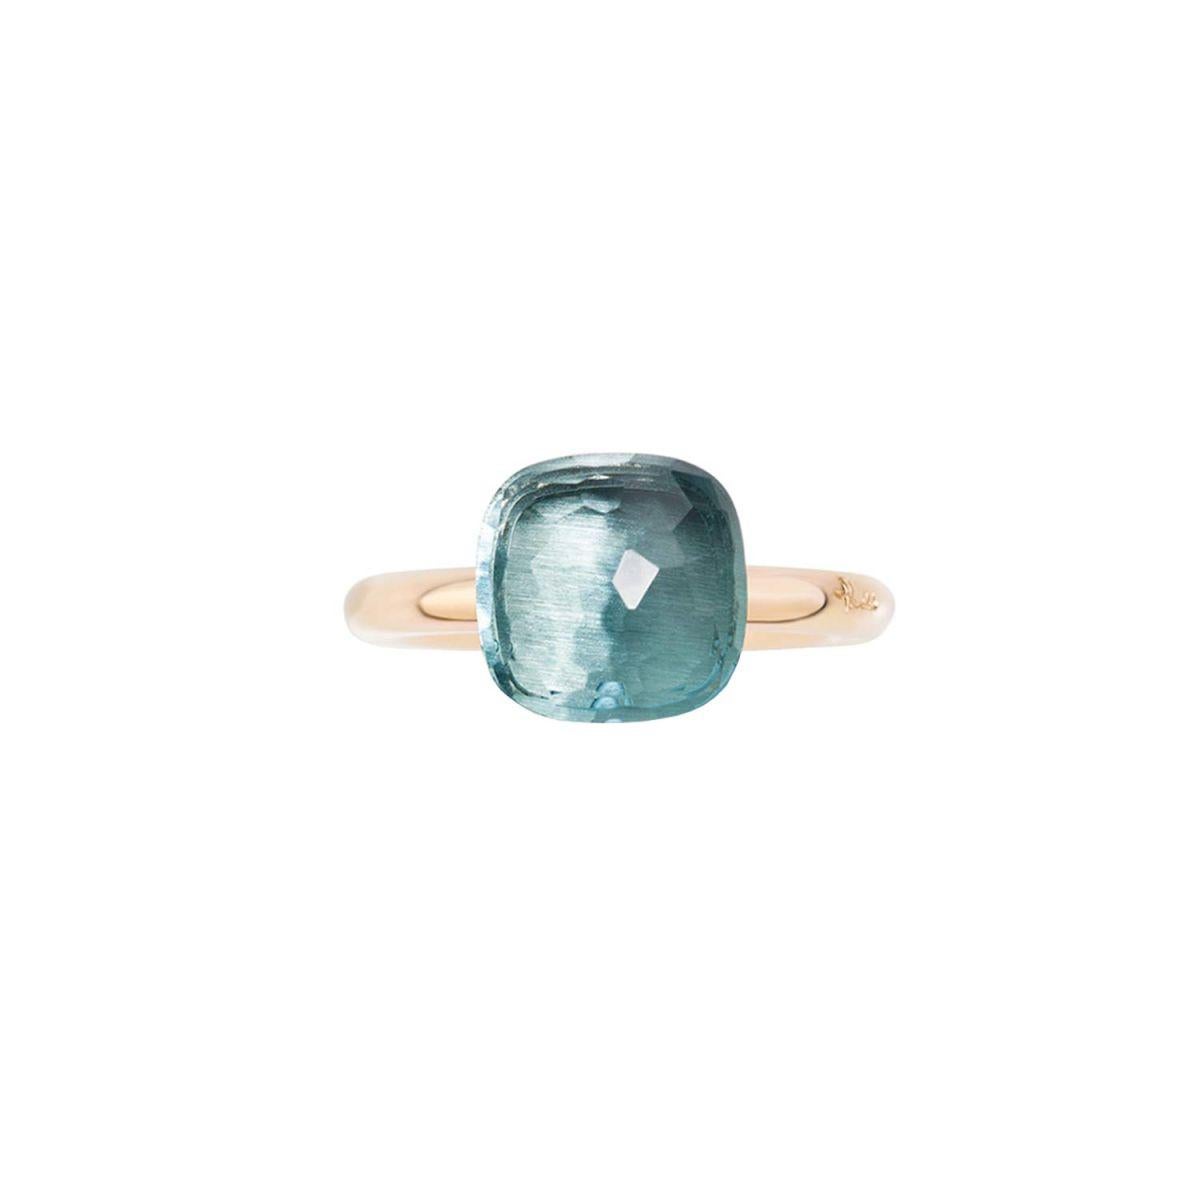 Nudo classic features an eye-catching gem carved in the most iconic design of the Maison. Pomellato Nudo Classic Ring in rose gold 18k decorated with a blue topaz.

Details:
Size EU: 50 
Size US: 5,5
Width: 16mm 
Total weight: 8 grams

The ring